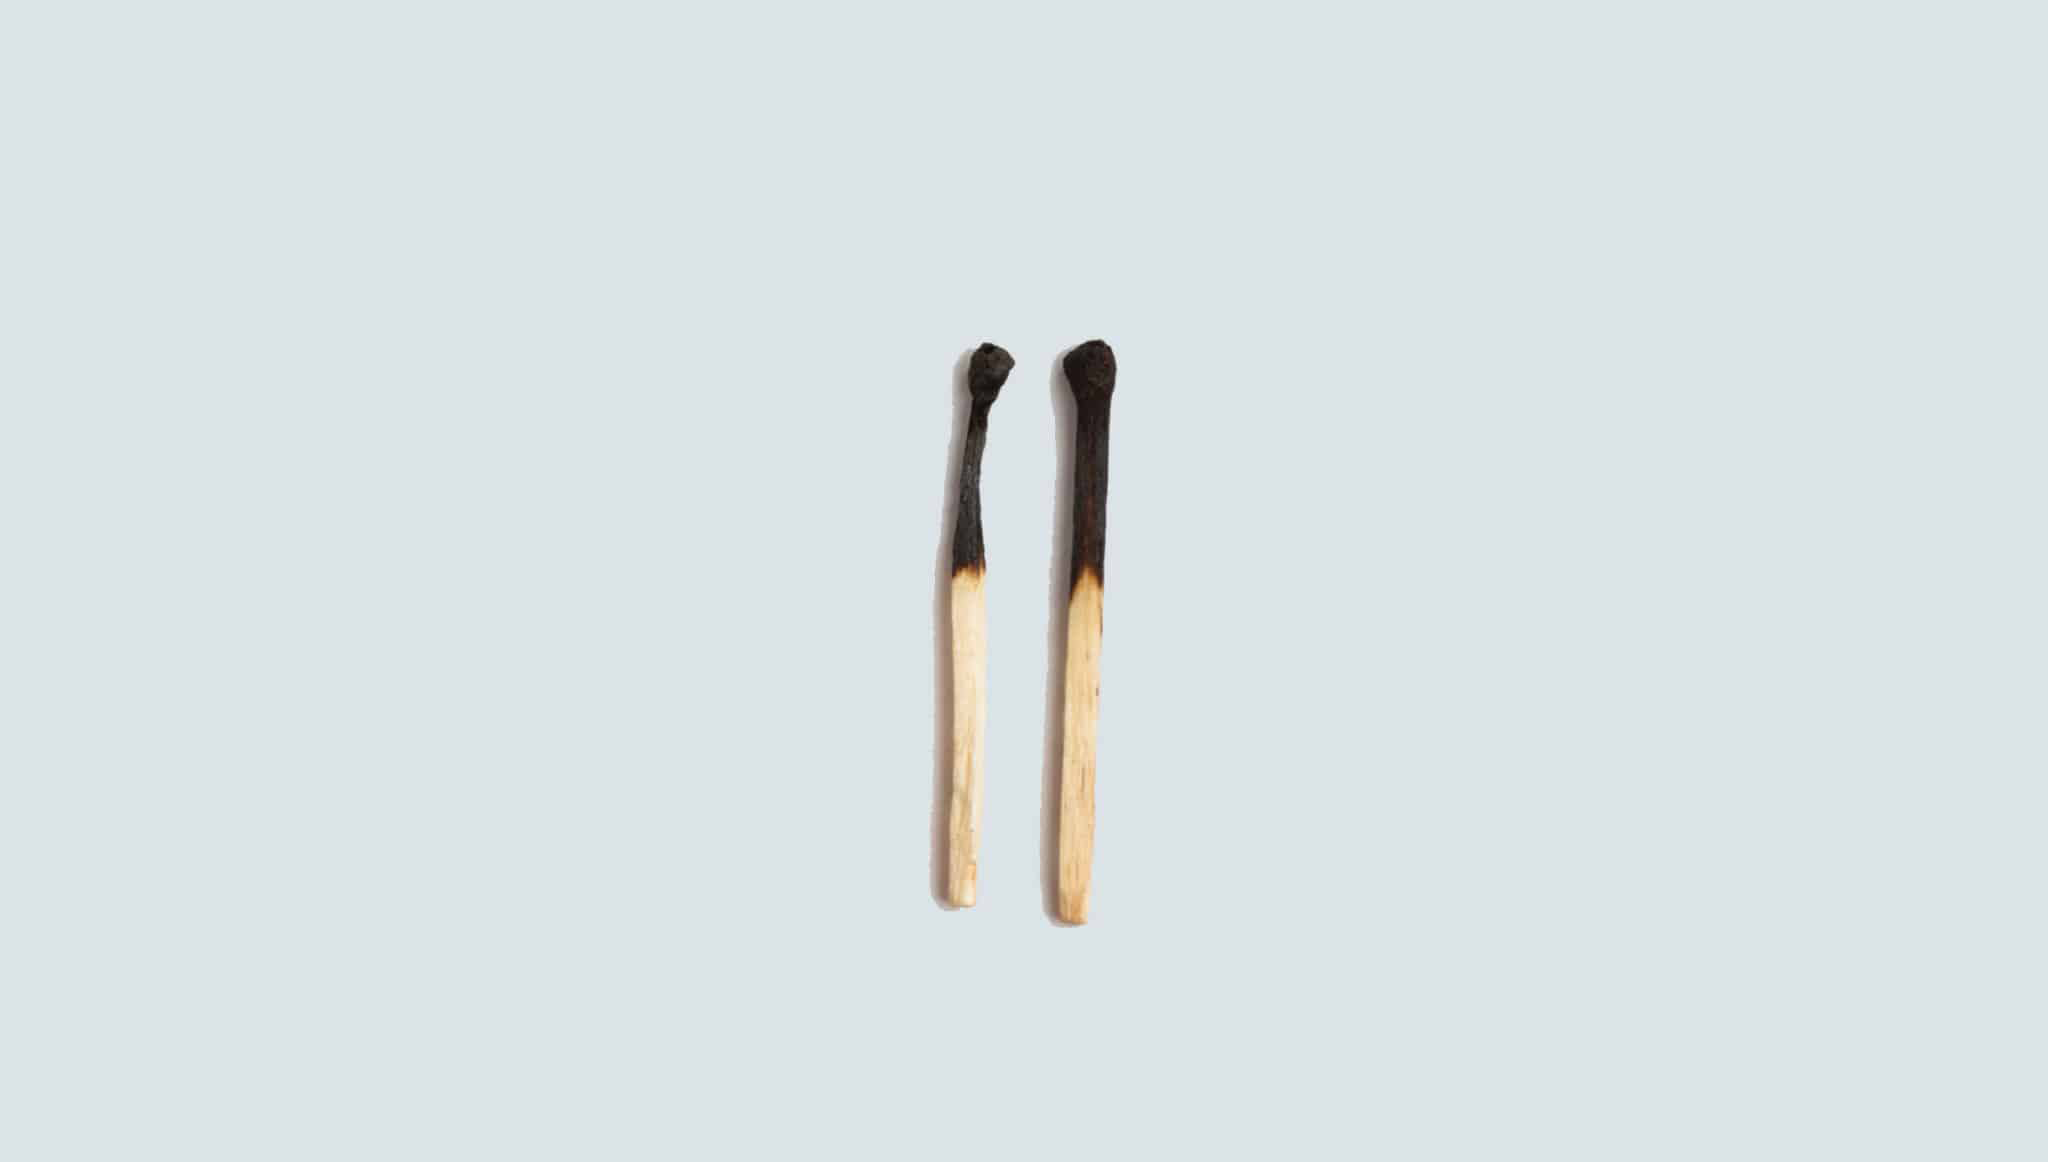 Photo of a two matchsticks next to each other